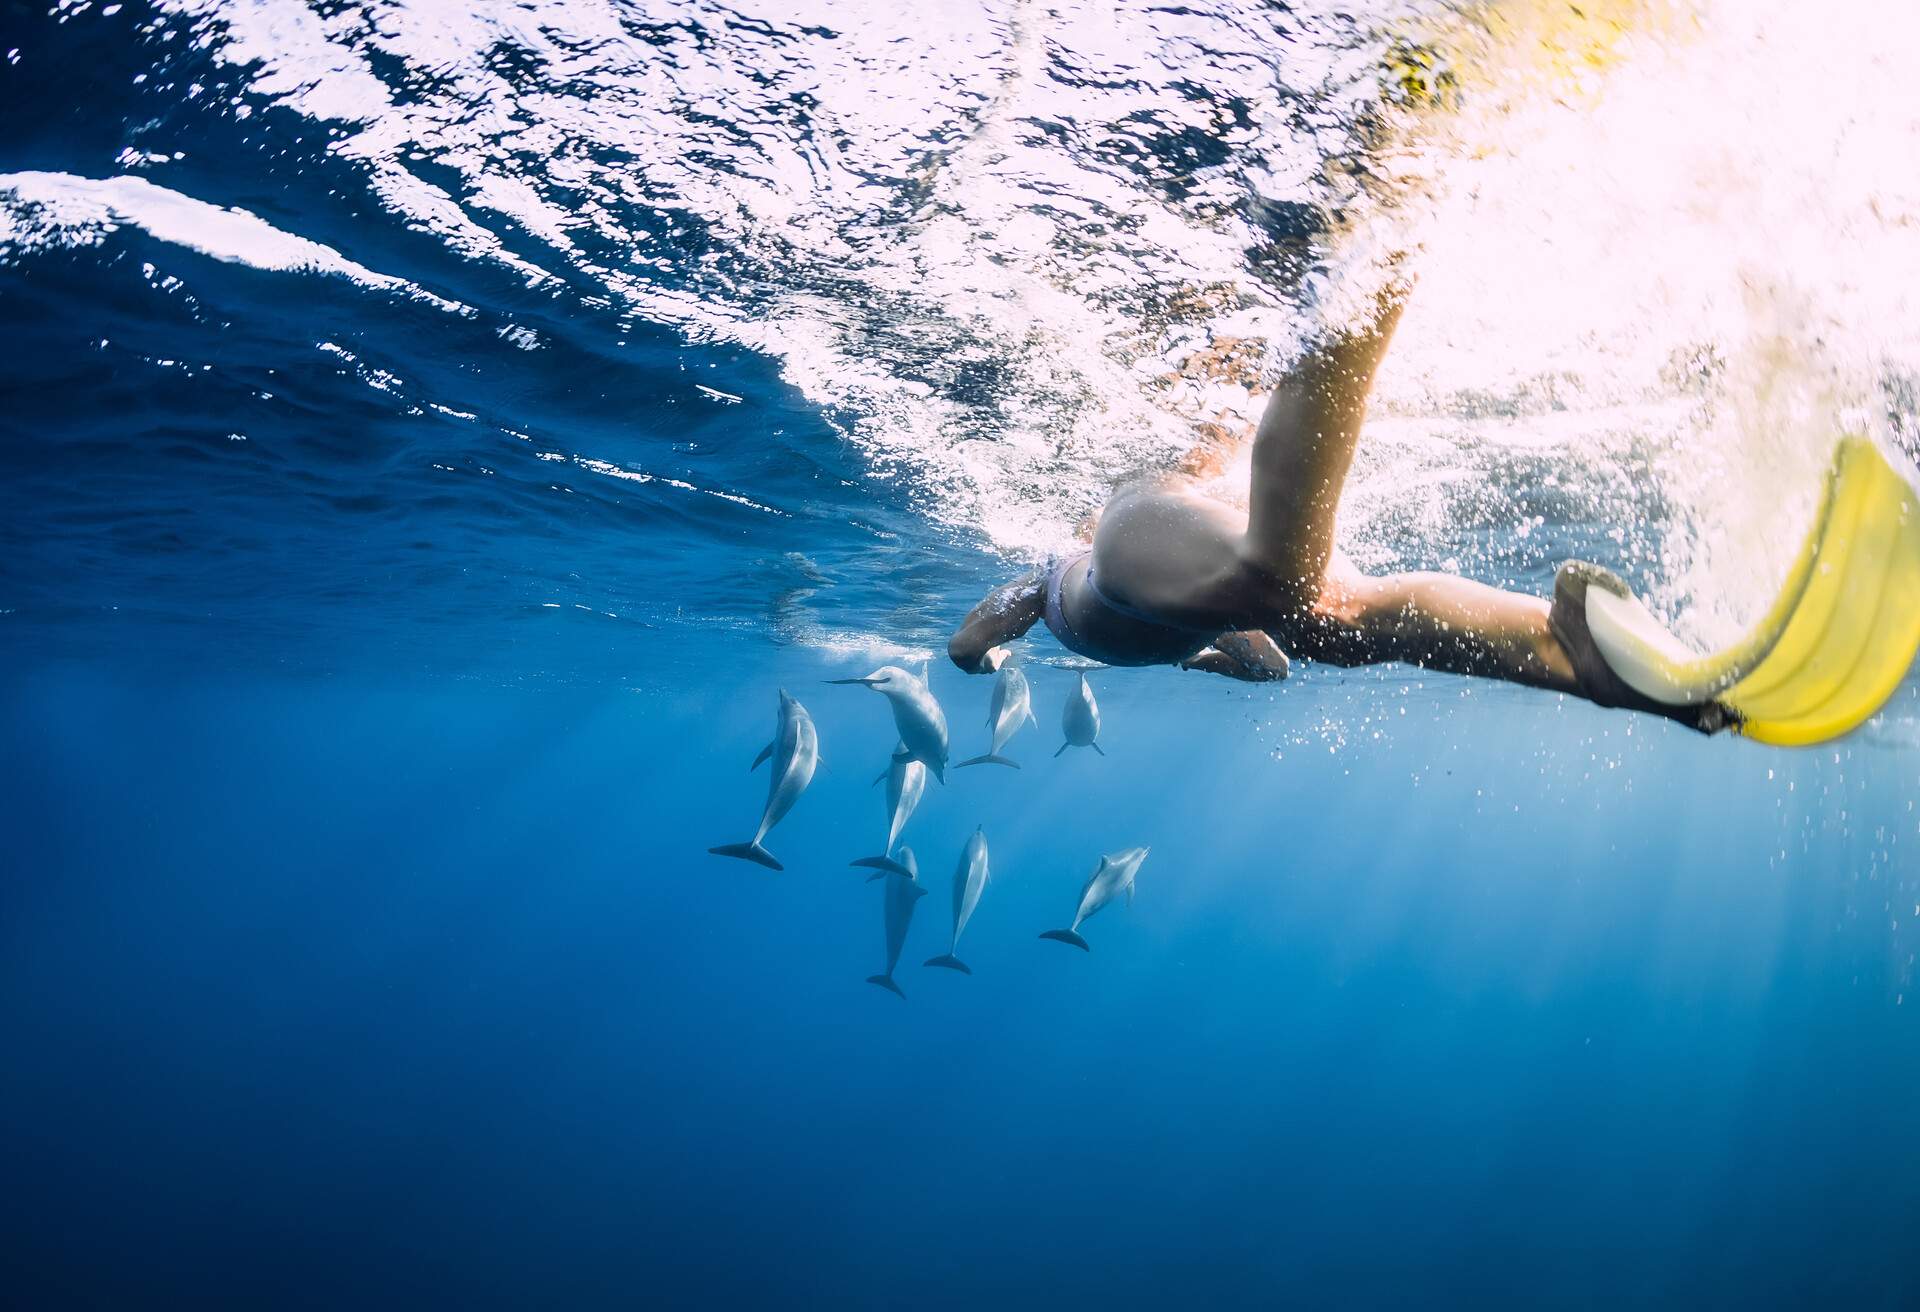 DEST_MAURITIUS_THEME_SNORKELLING-WITH-DOLPHINS_GettyImages-1269478501